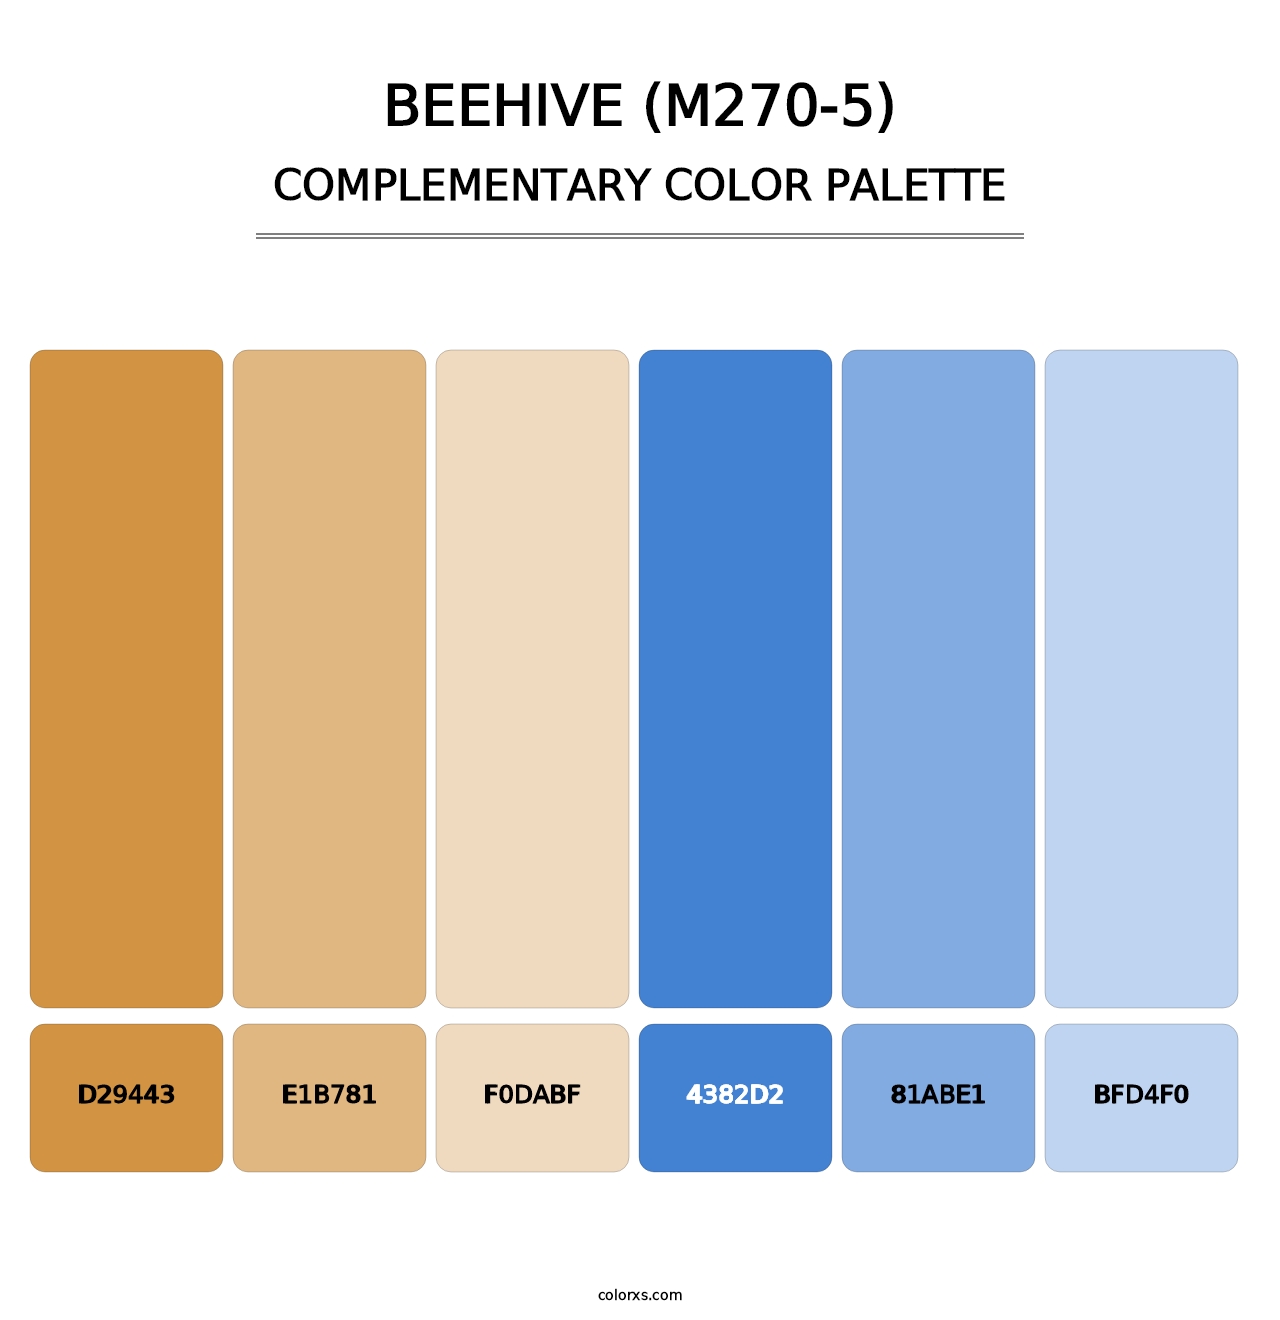 Beehive (M270-5) - Complementary Color Palette